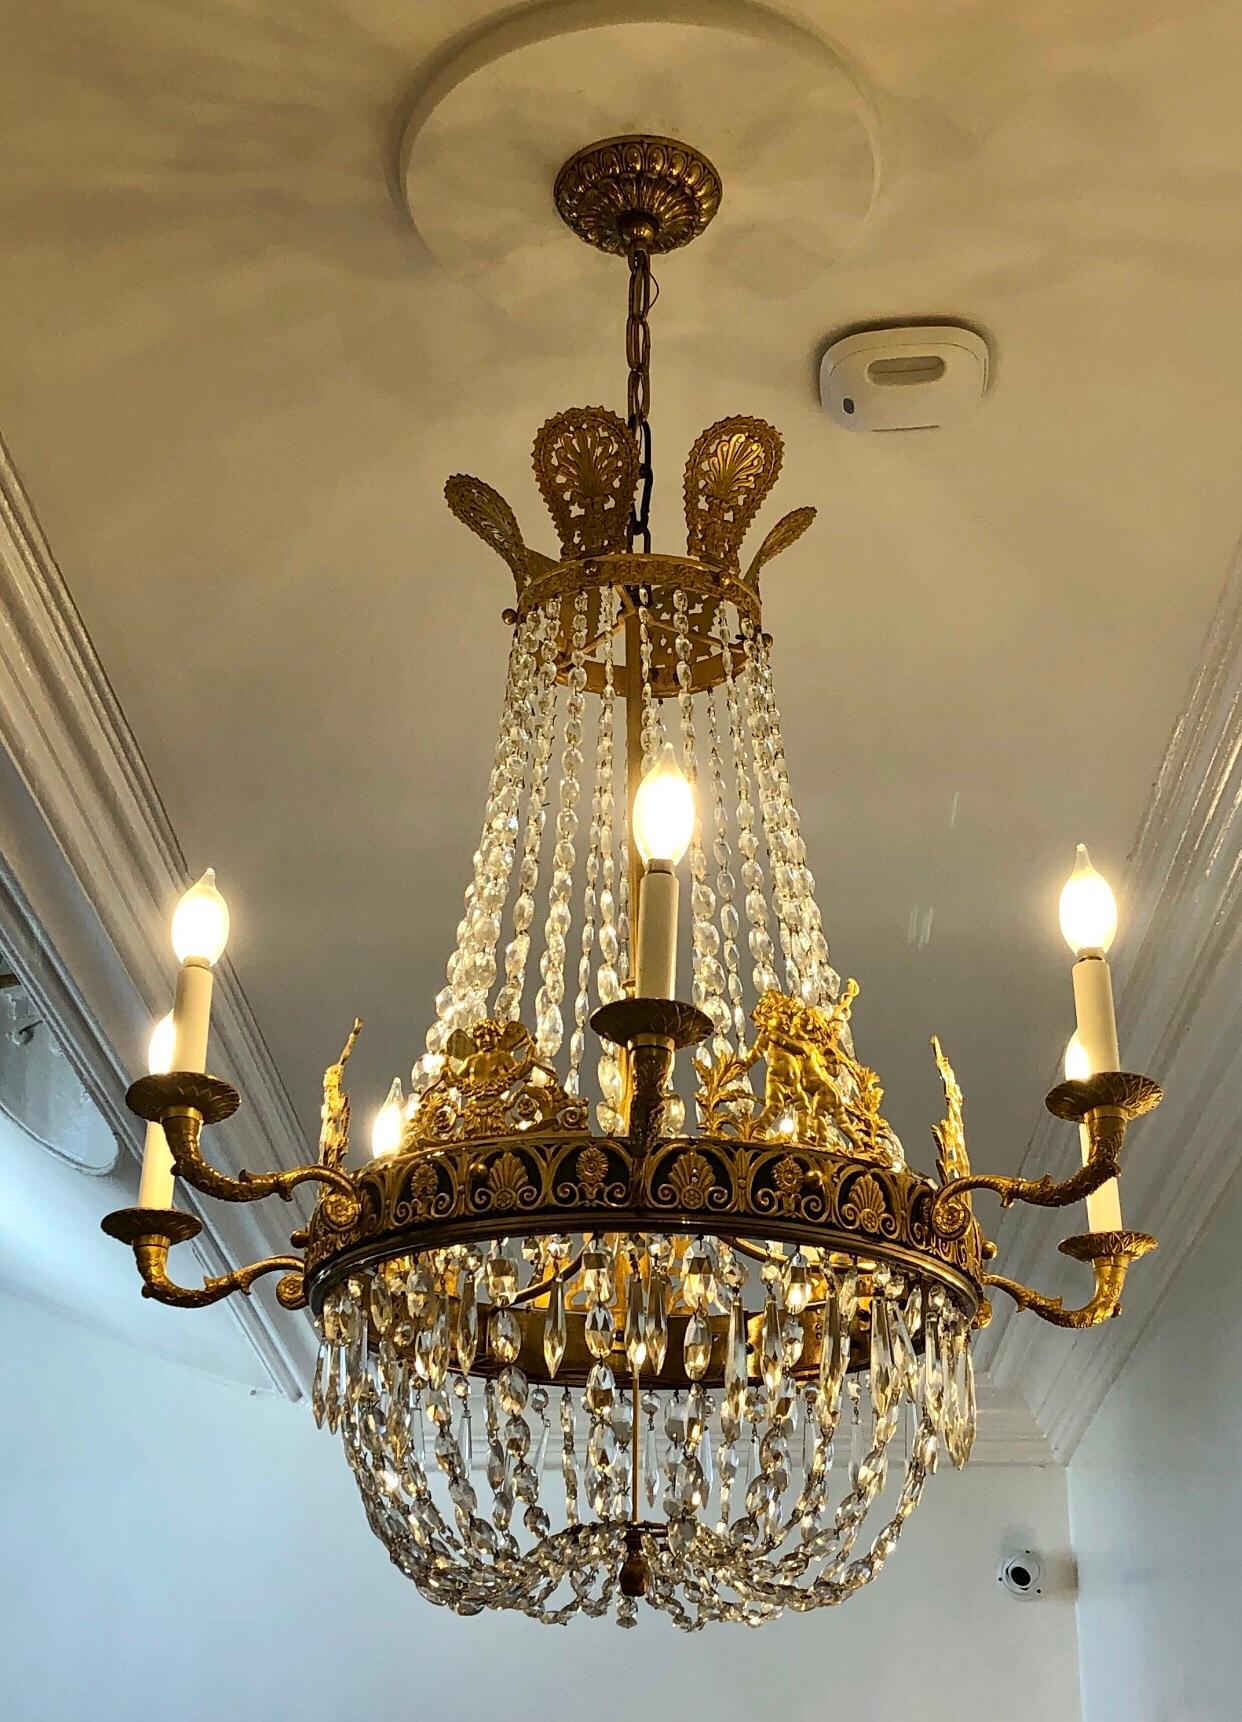 French Empire Ormolu and Crystal 7-Arm Chandelier, 19th Century For Sale 9